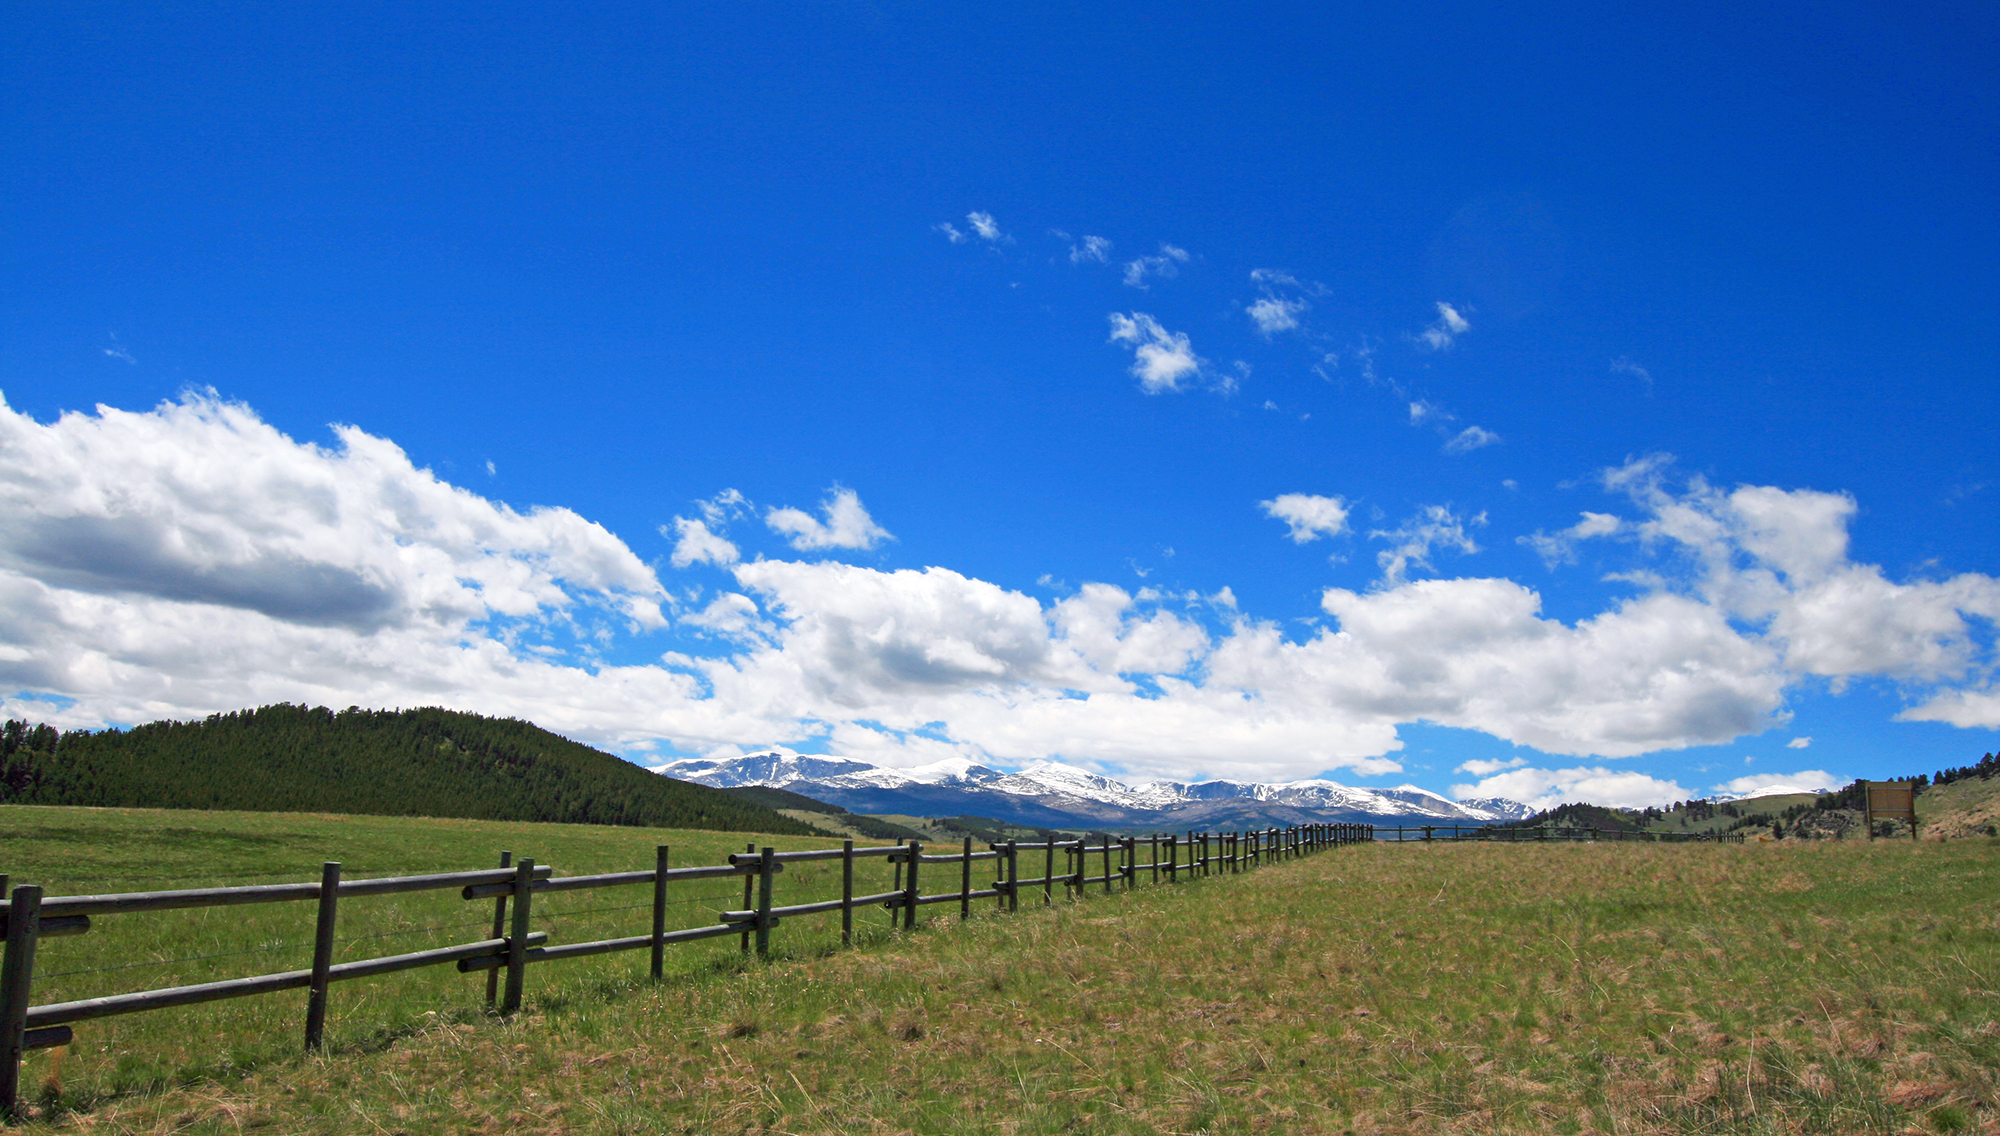 A wooden fence cuts across a sprawling field fringed by hills under a blue sky.